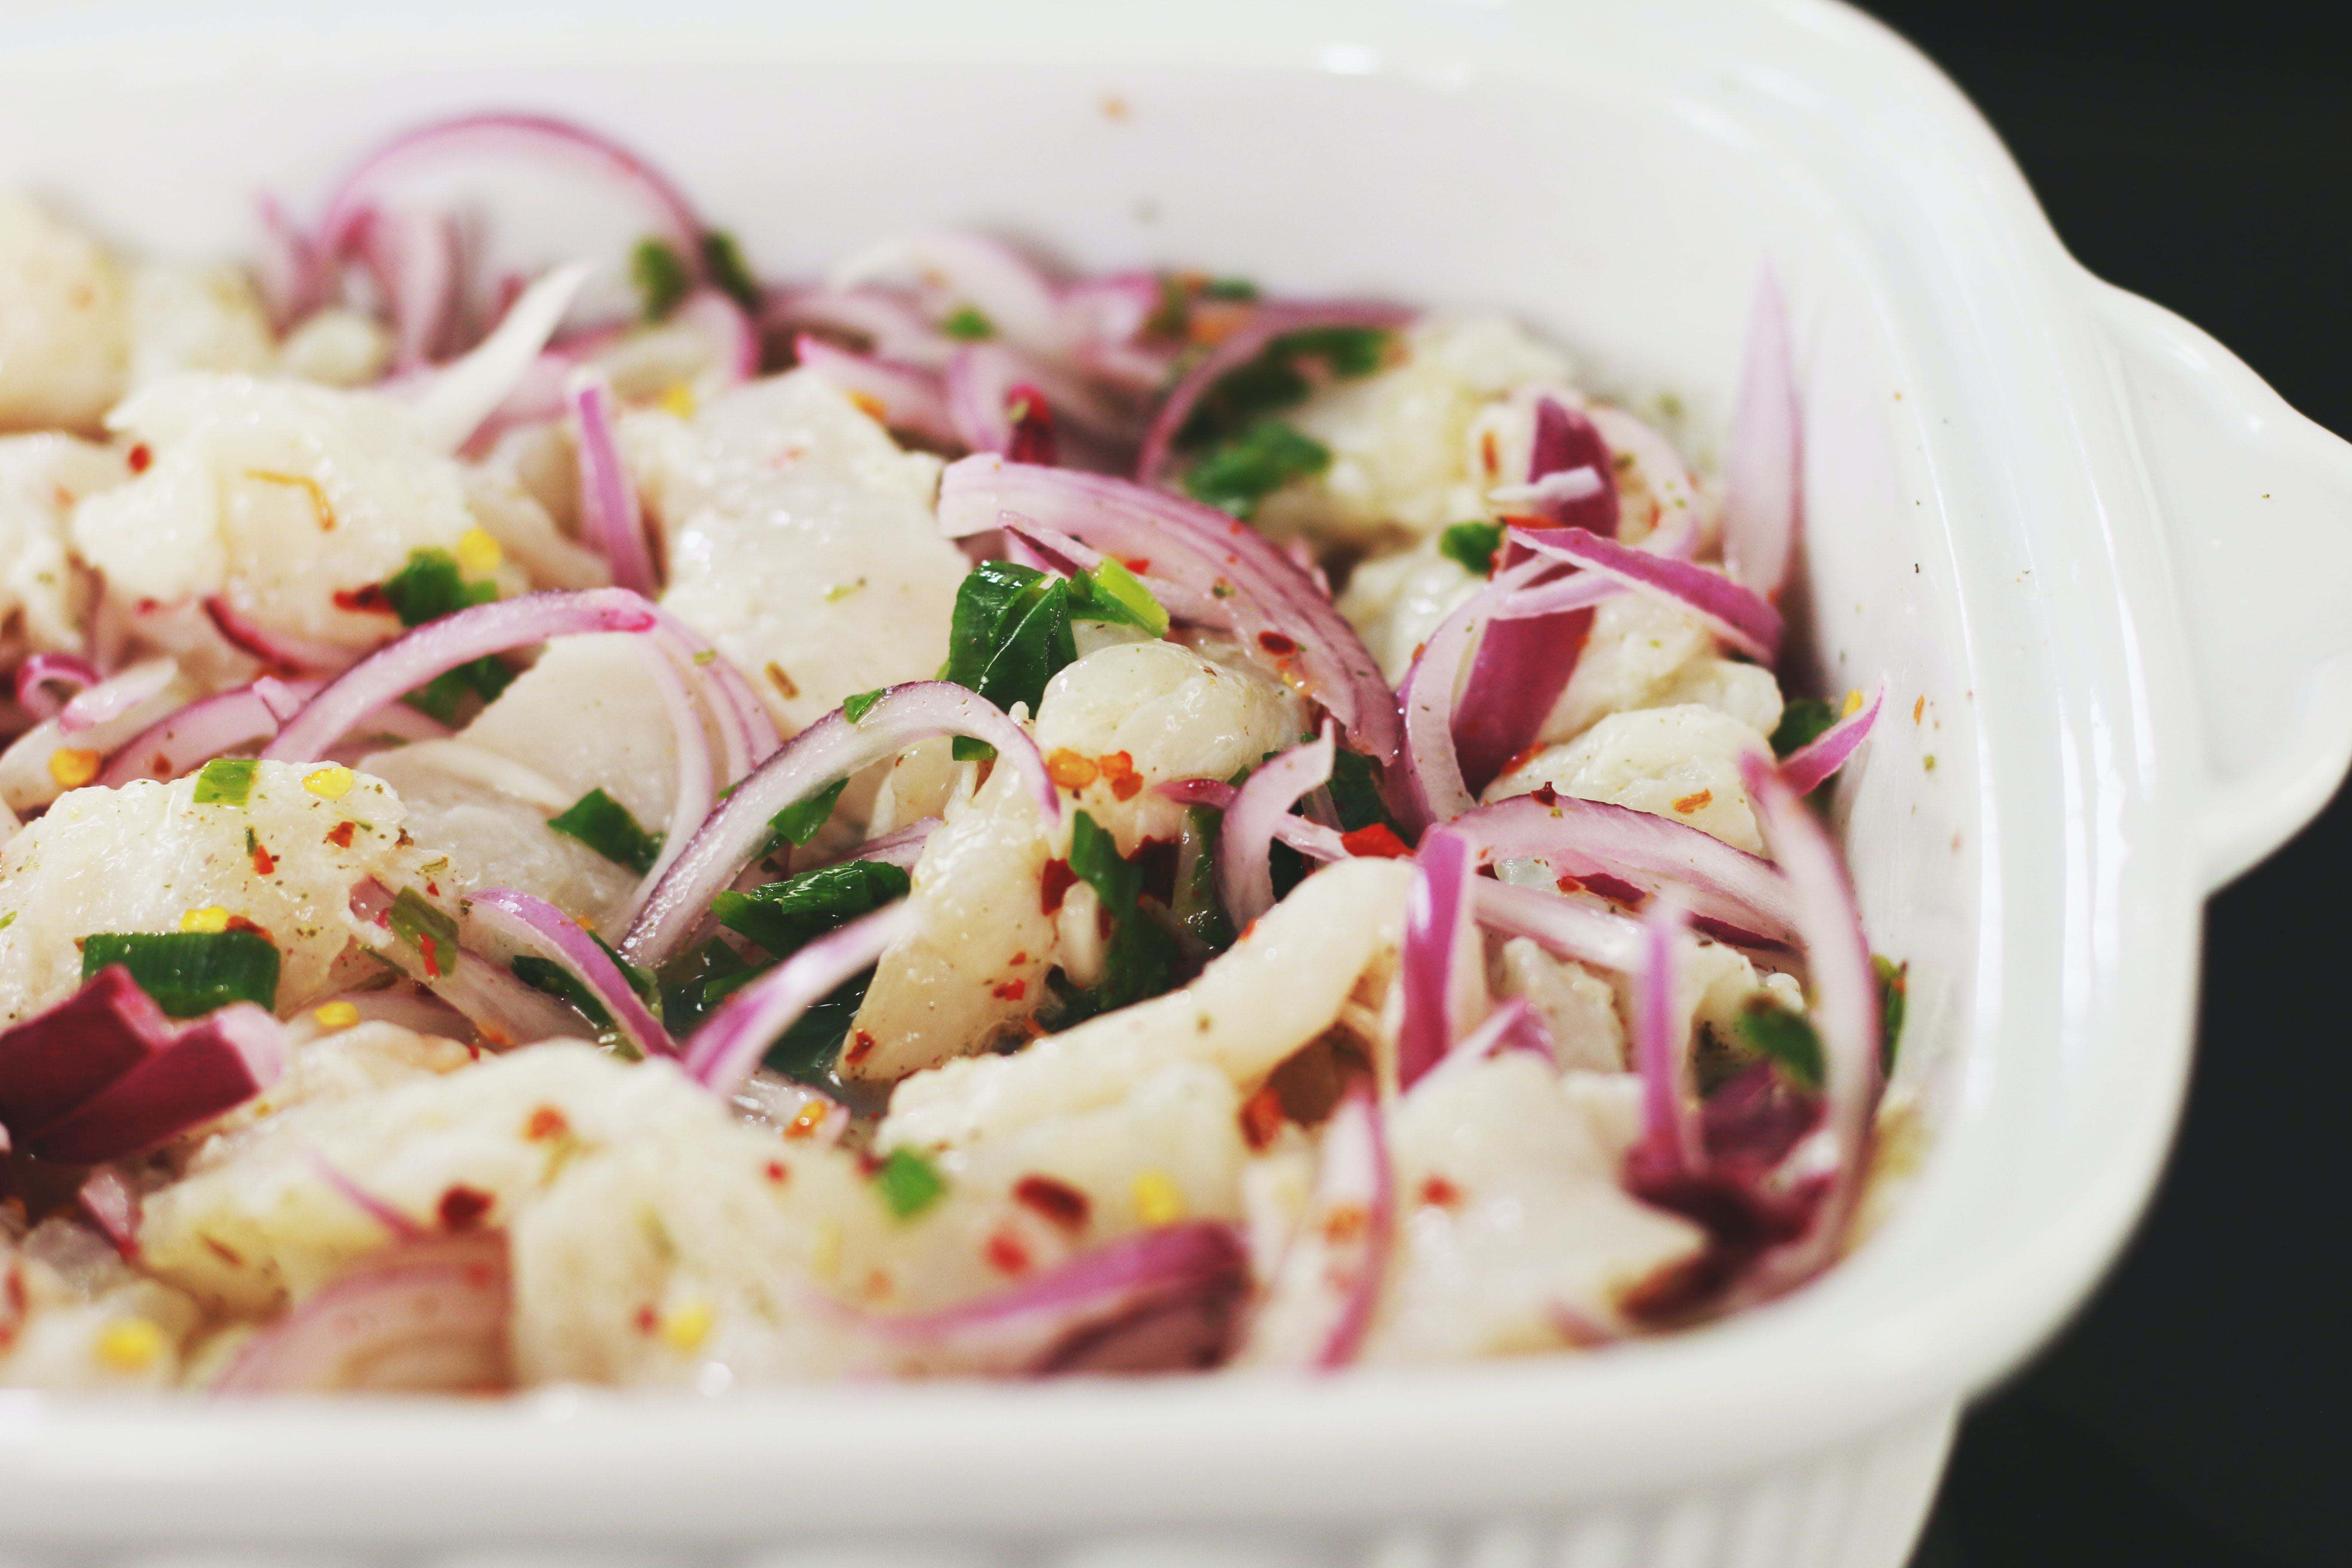 Potato salad with red onions